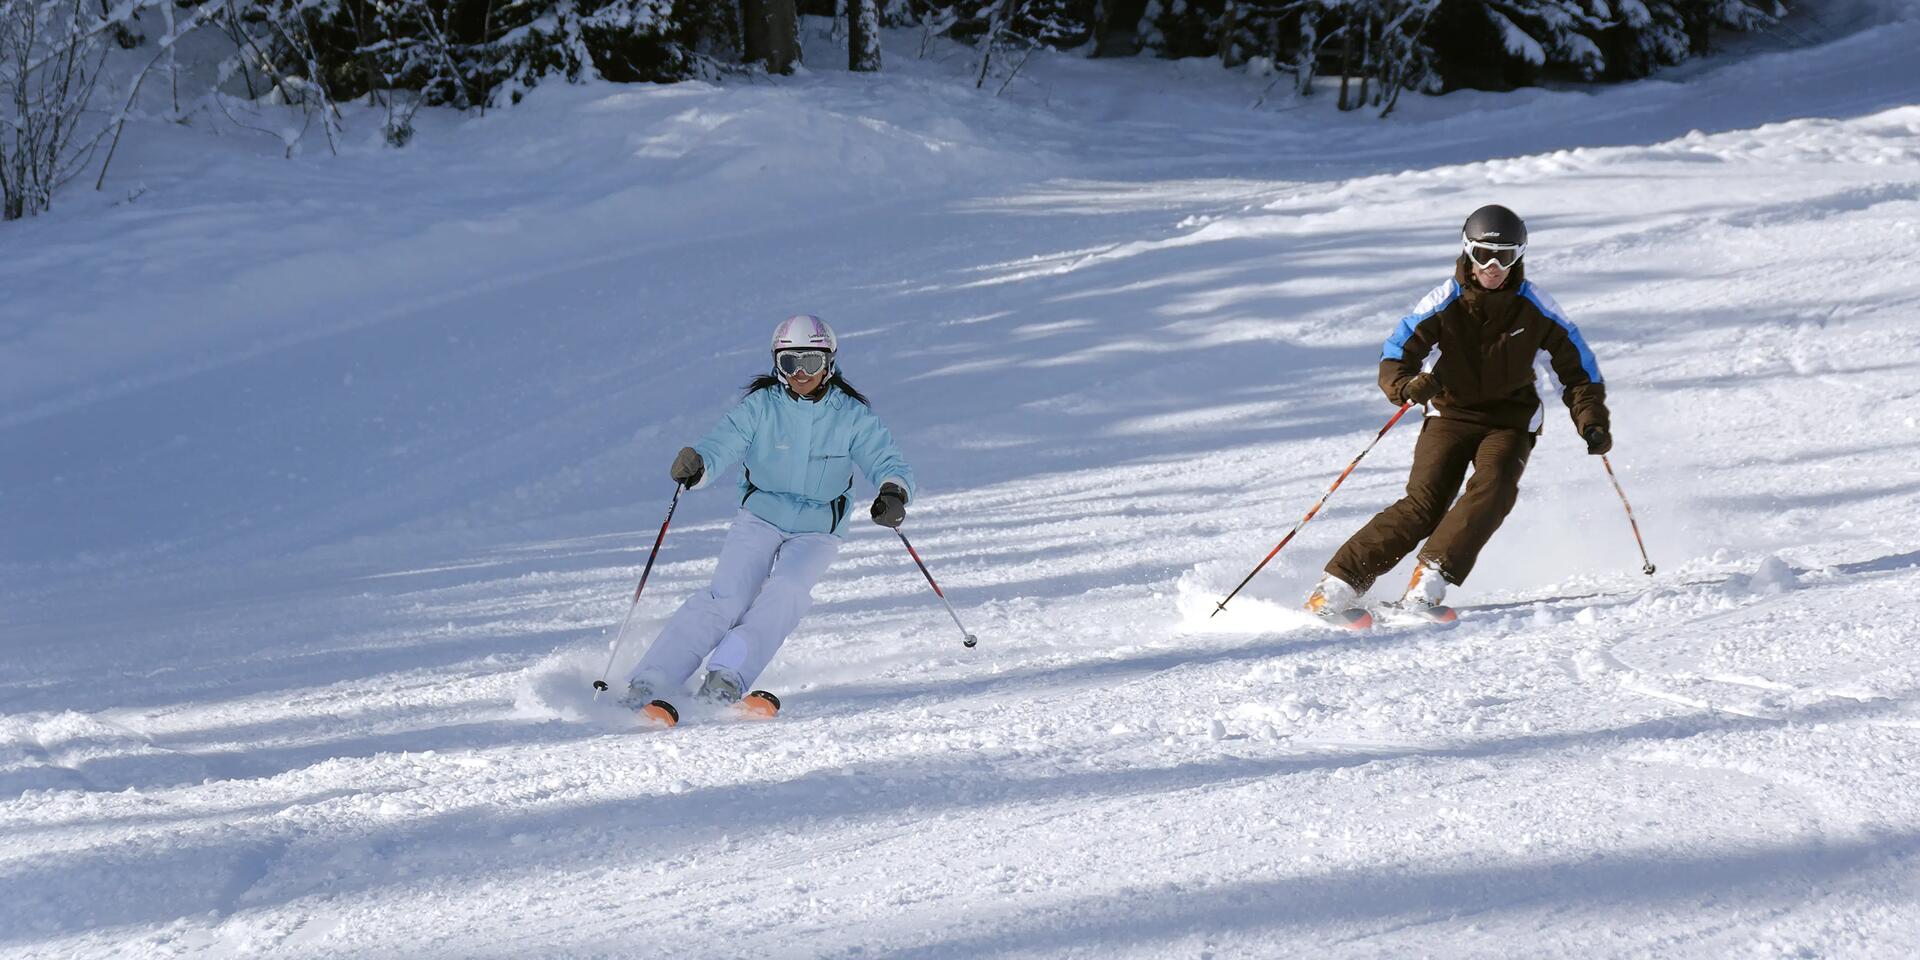 Two advanced skiers making their way down a slope